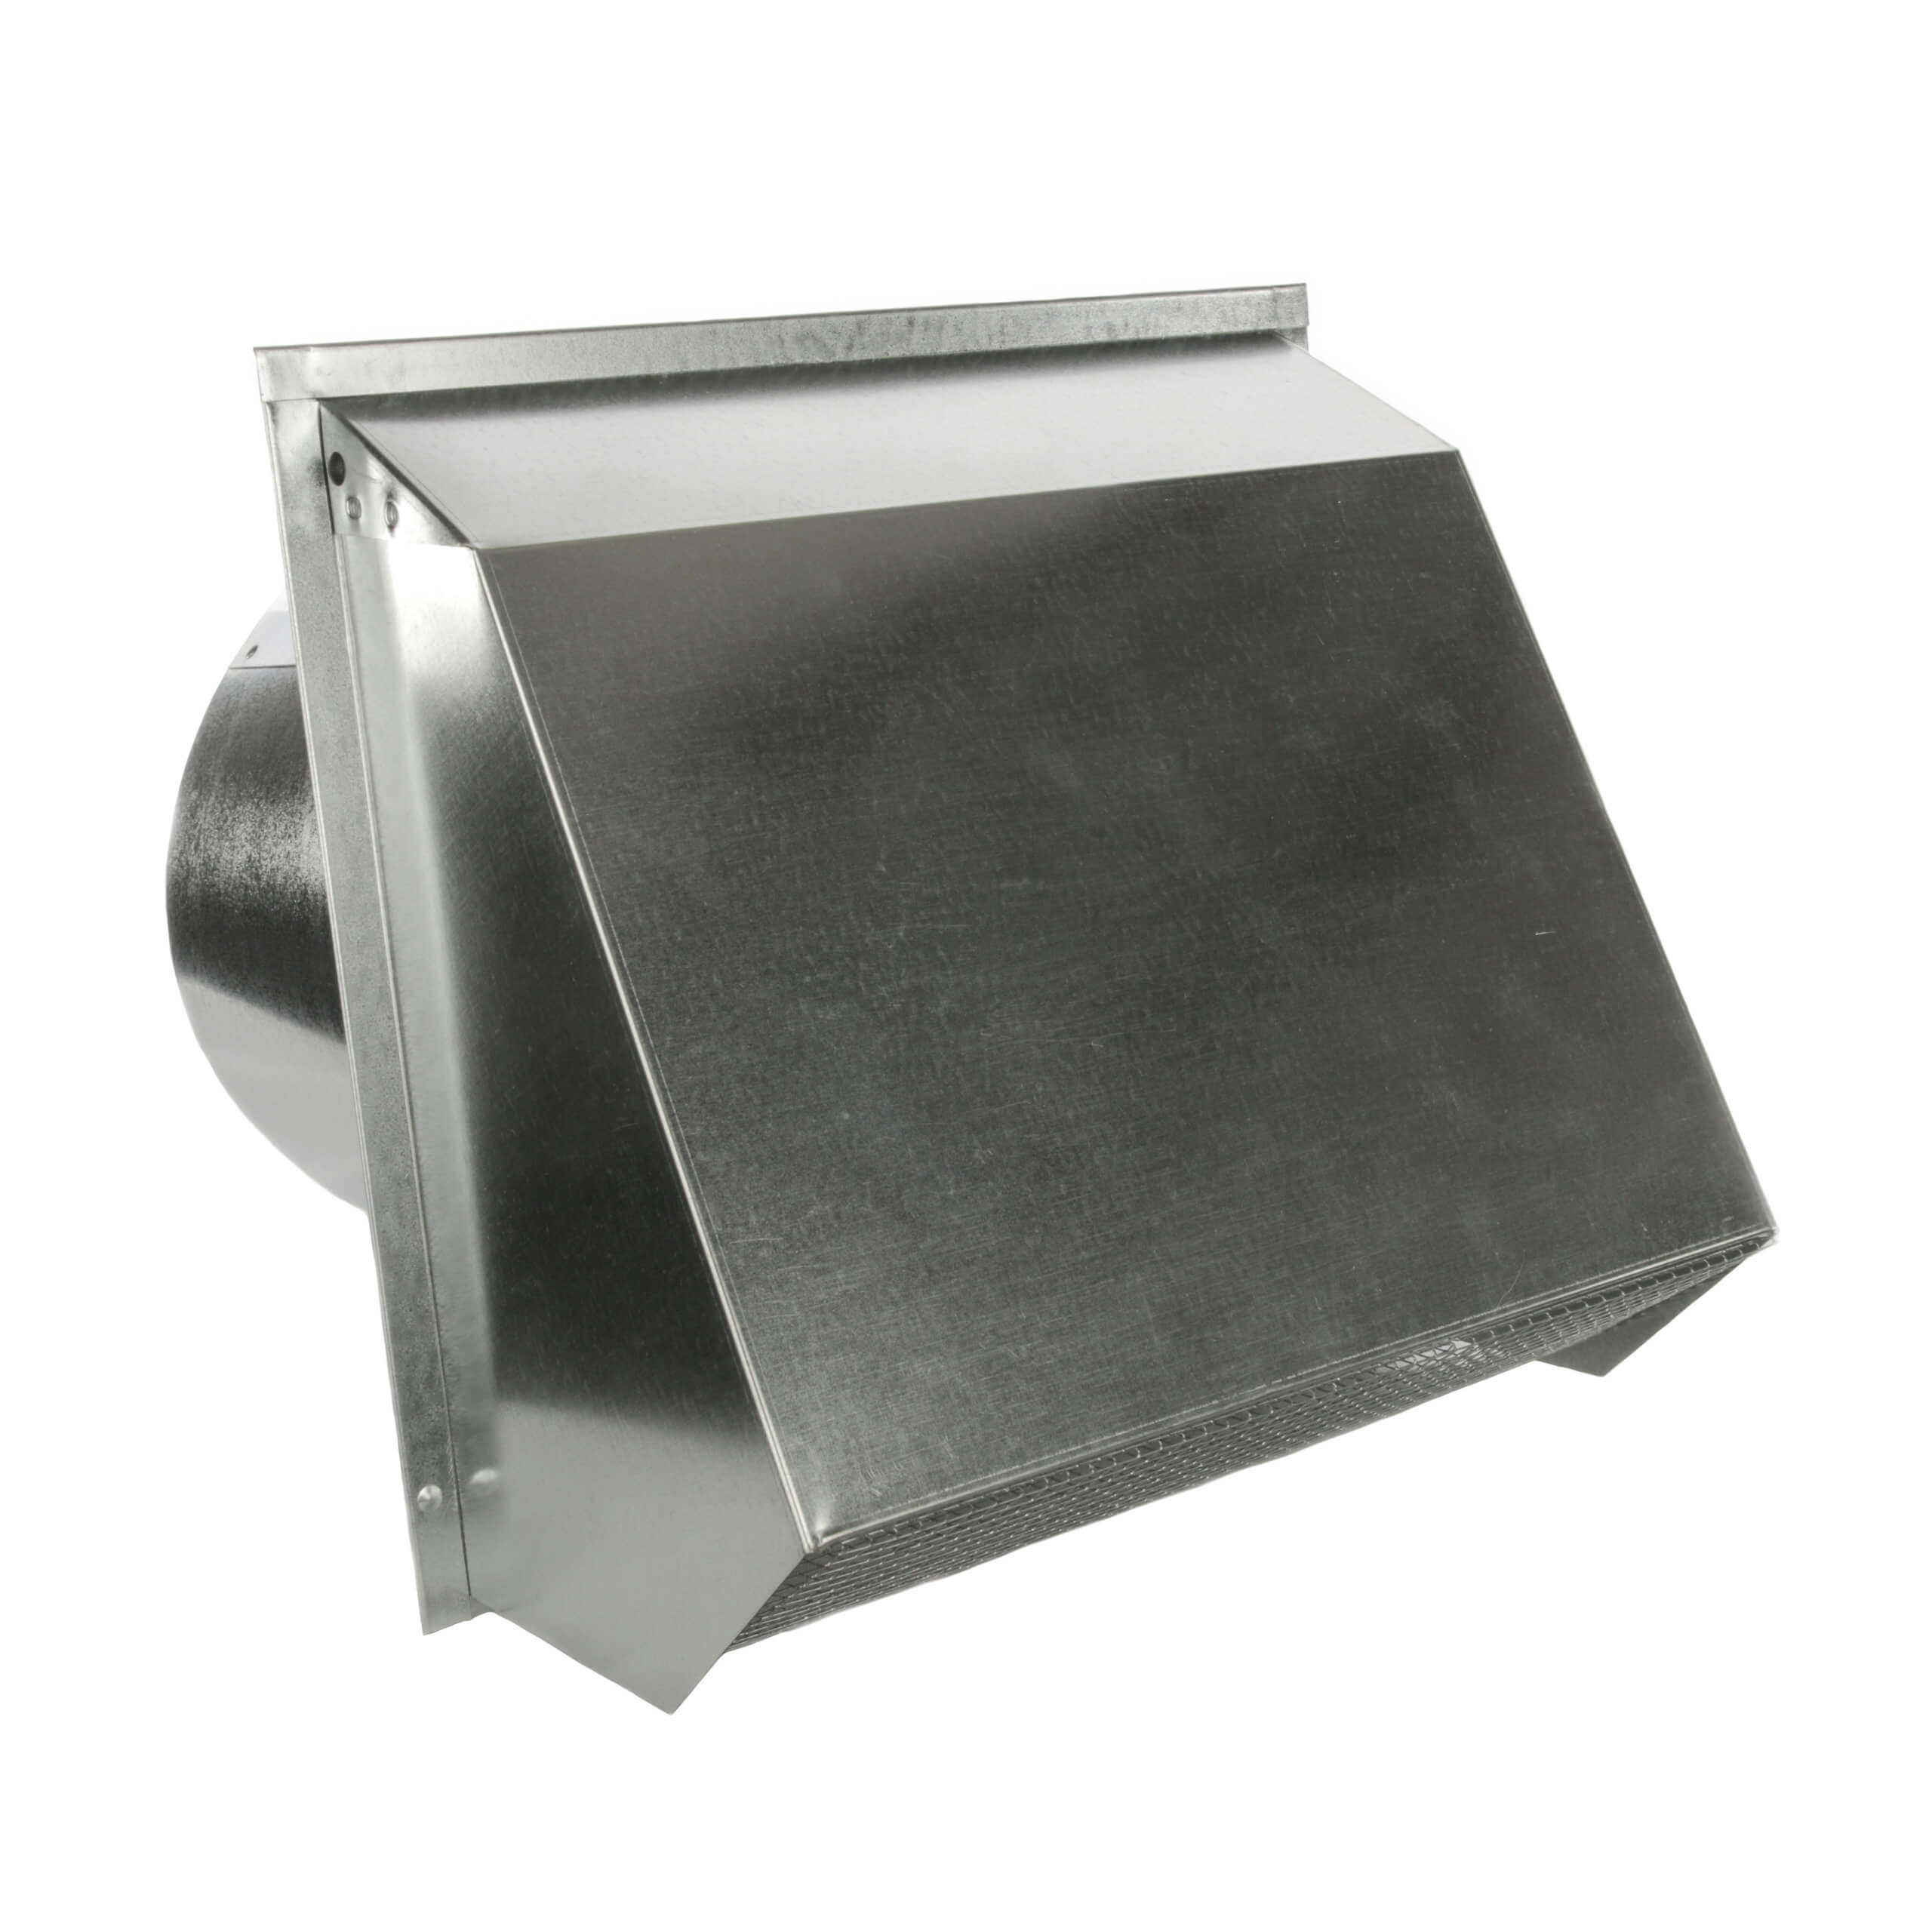 8" / rubber seal / 4" optional HOOD Wall-mounted Air Intake / Exhaust Vent